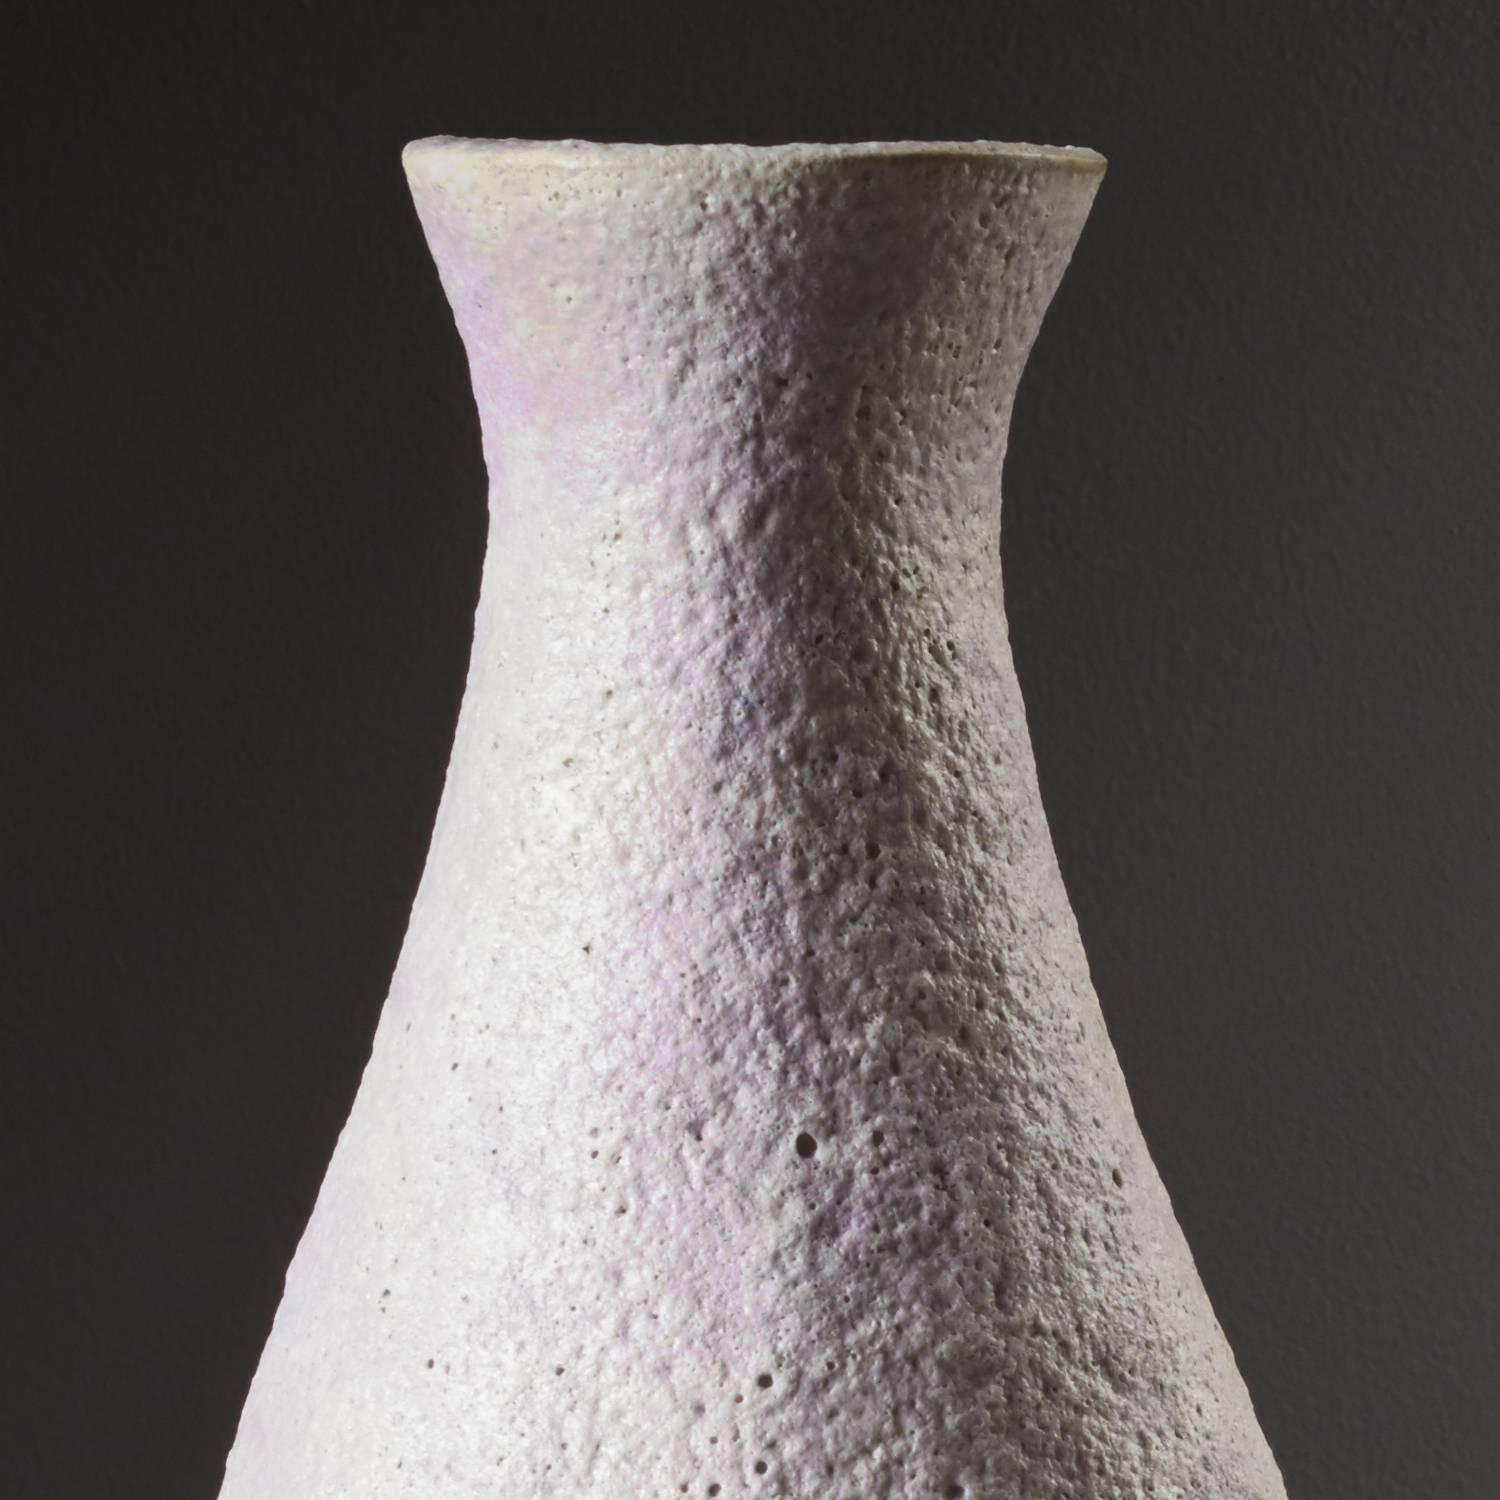 Pink Snow Vessel by ceramicist Iva Polachova, a textured piece of stoneware with a distinct volcanic glaze. A unique piece which has been coiled and crafted with simple scraping tools.

This vessel has been crafted to express the “play of light on